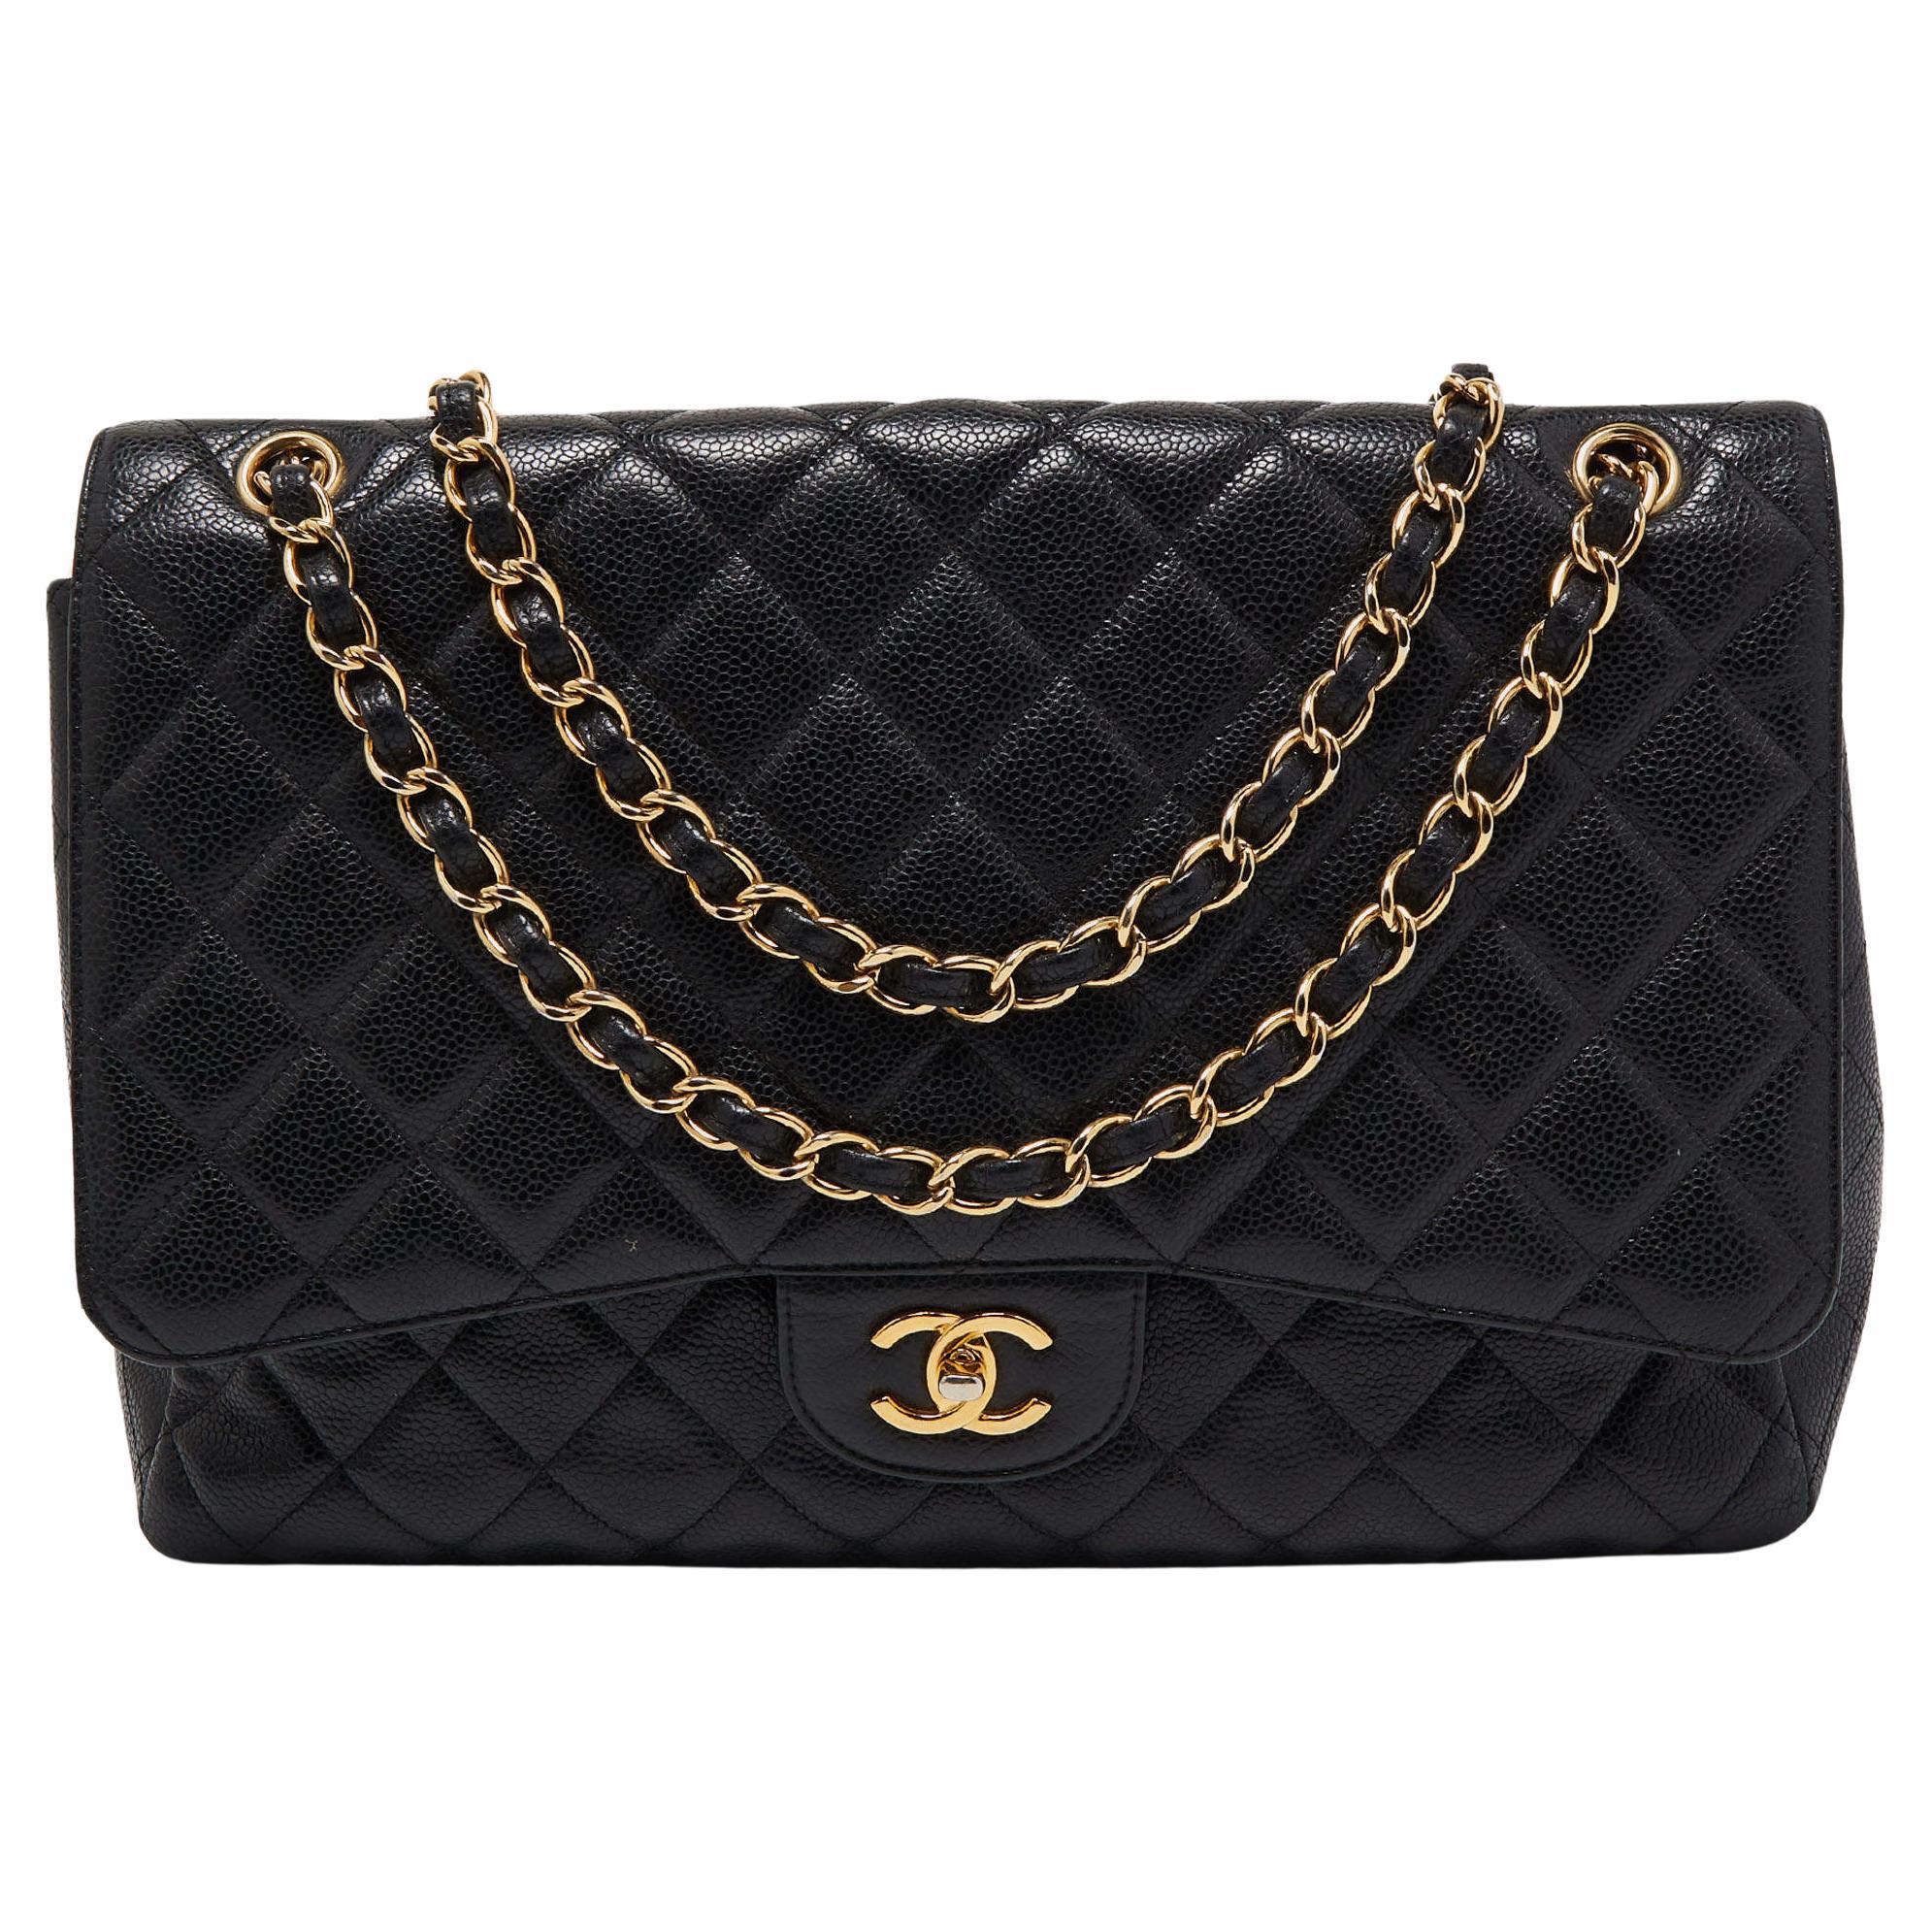 Chanel Black Quilted Caviar Leather Maxi Classic Single Flap Bag For Sale